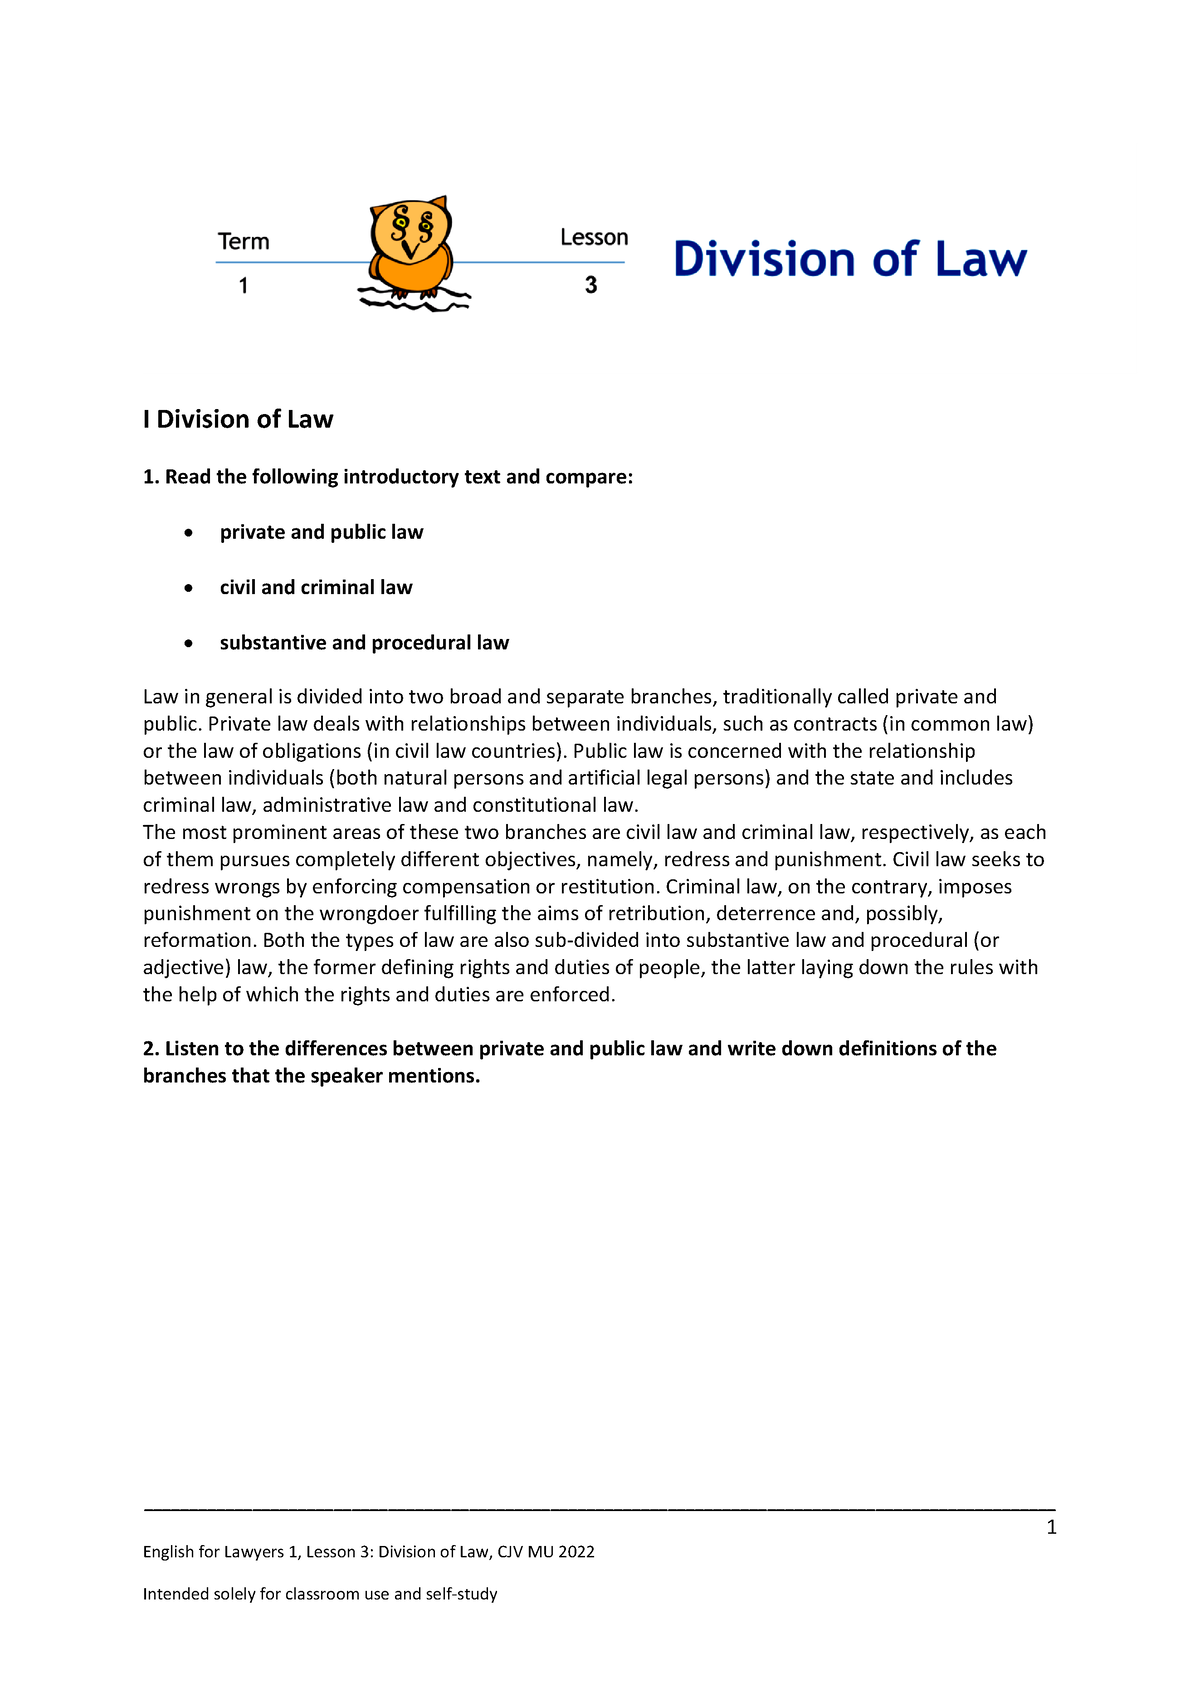 division of law assignment